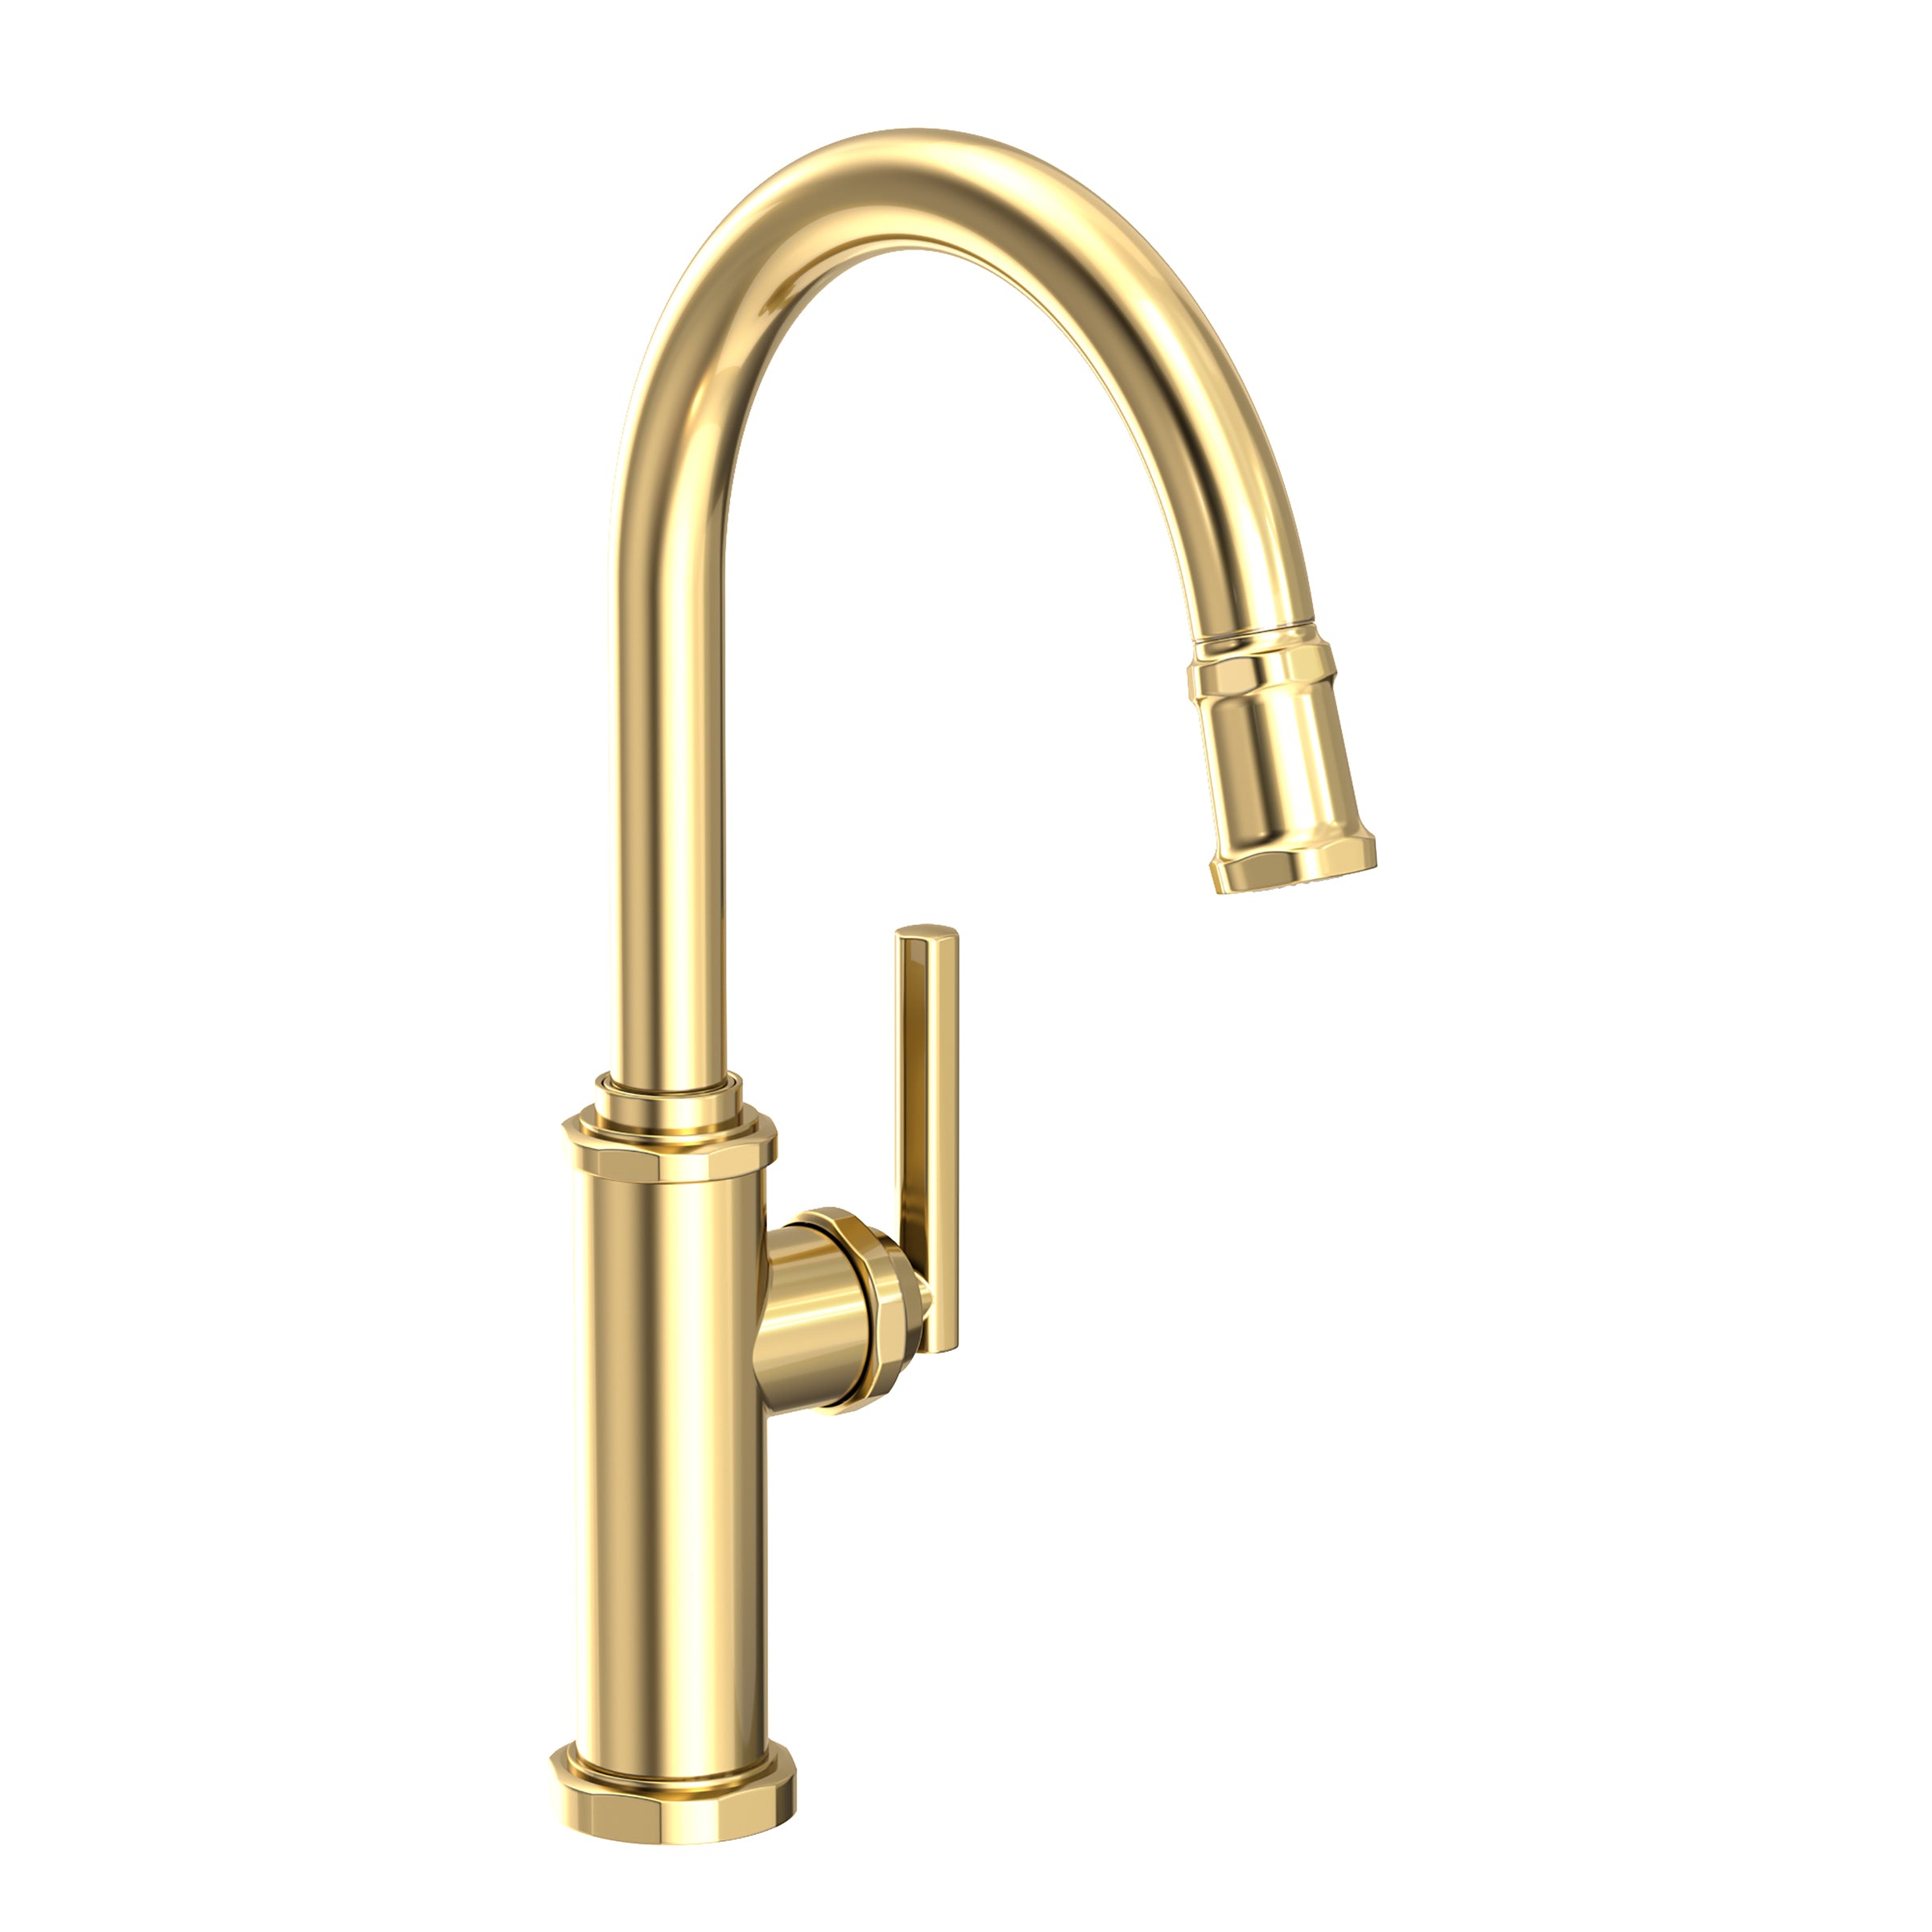 Newport Brass Heaney Pull-down Kitchen Faucet